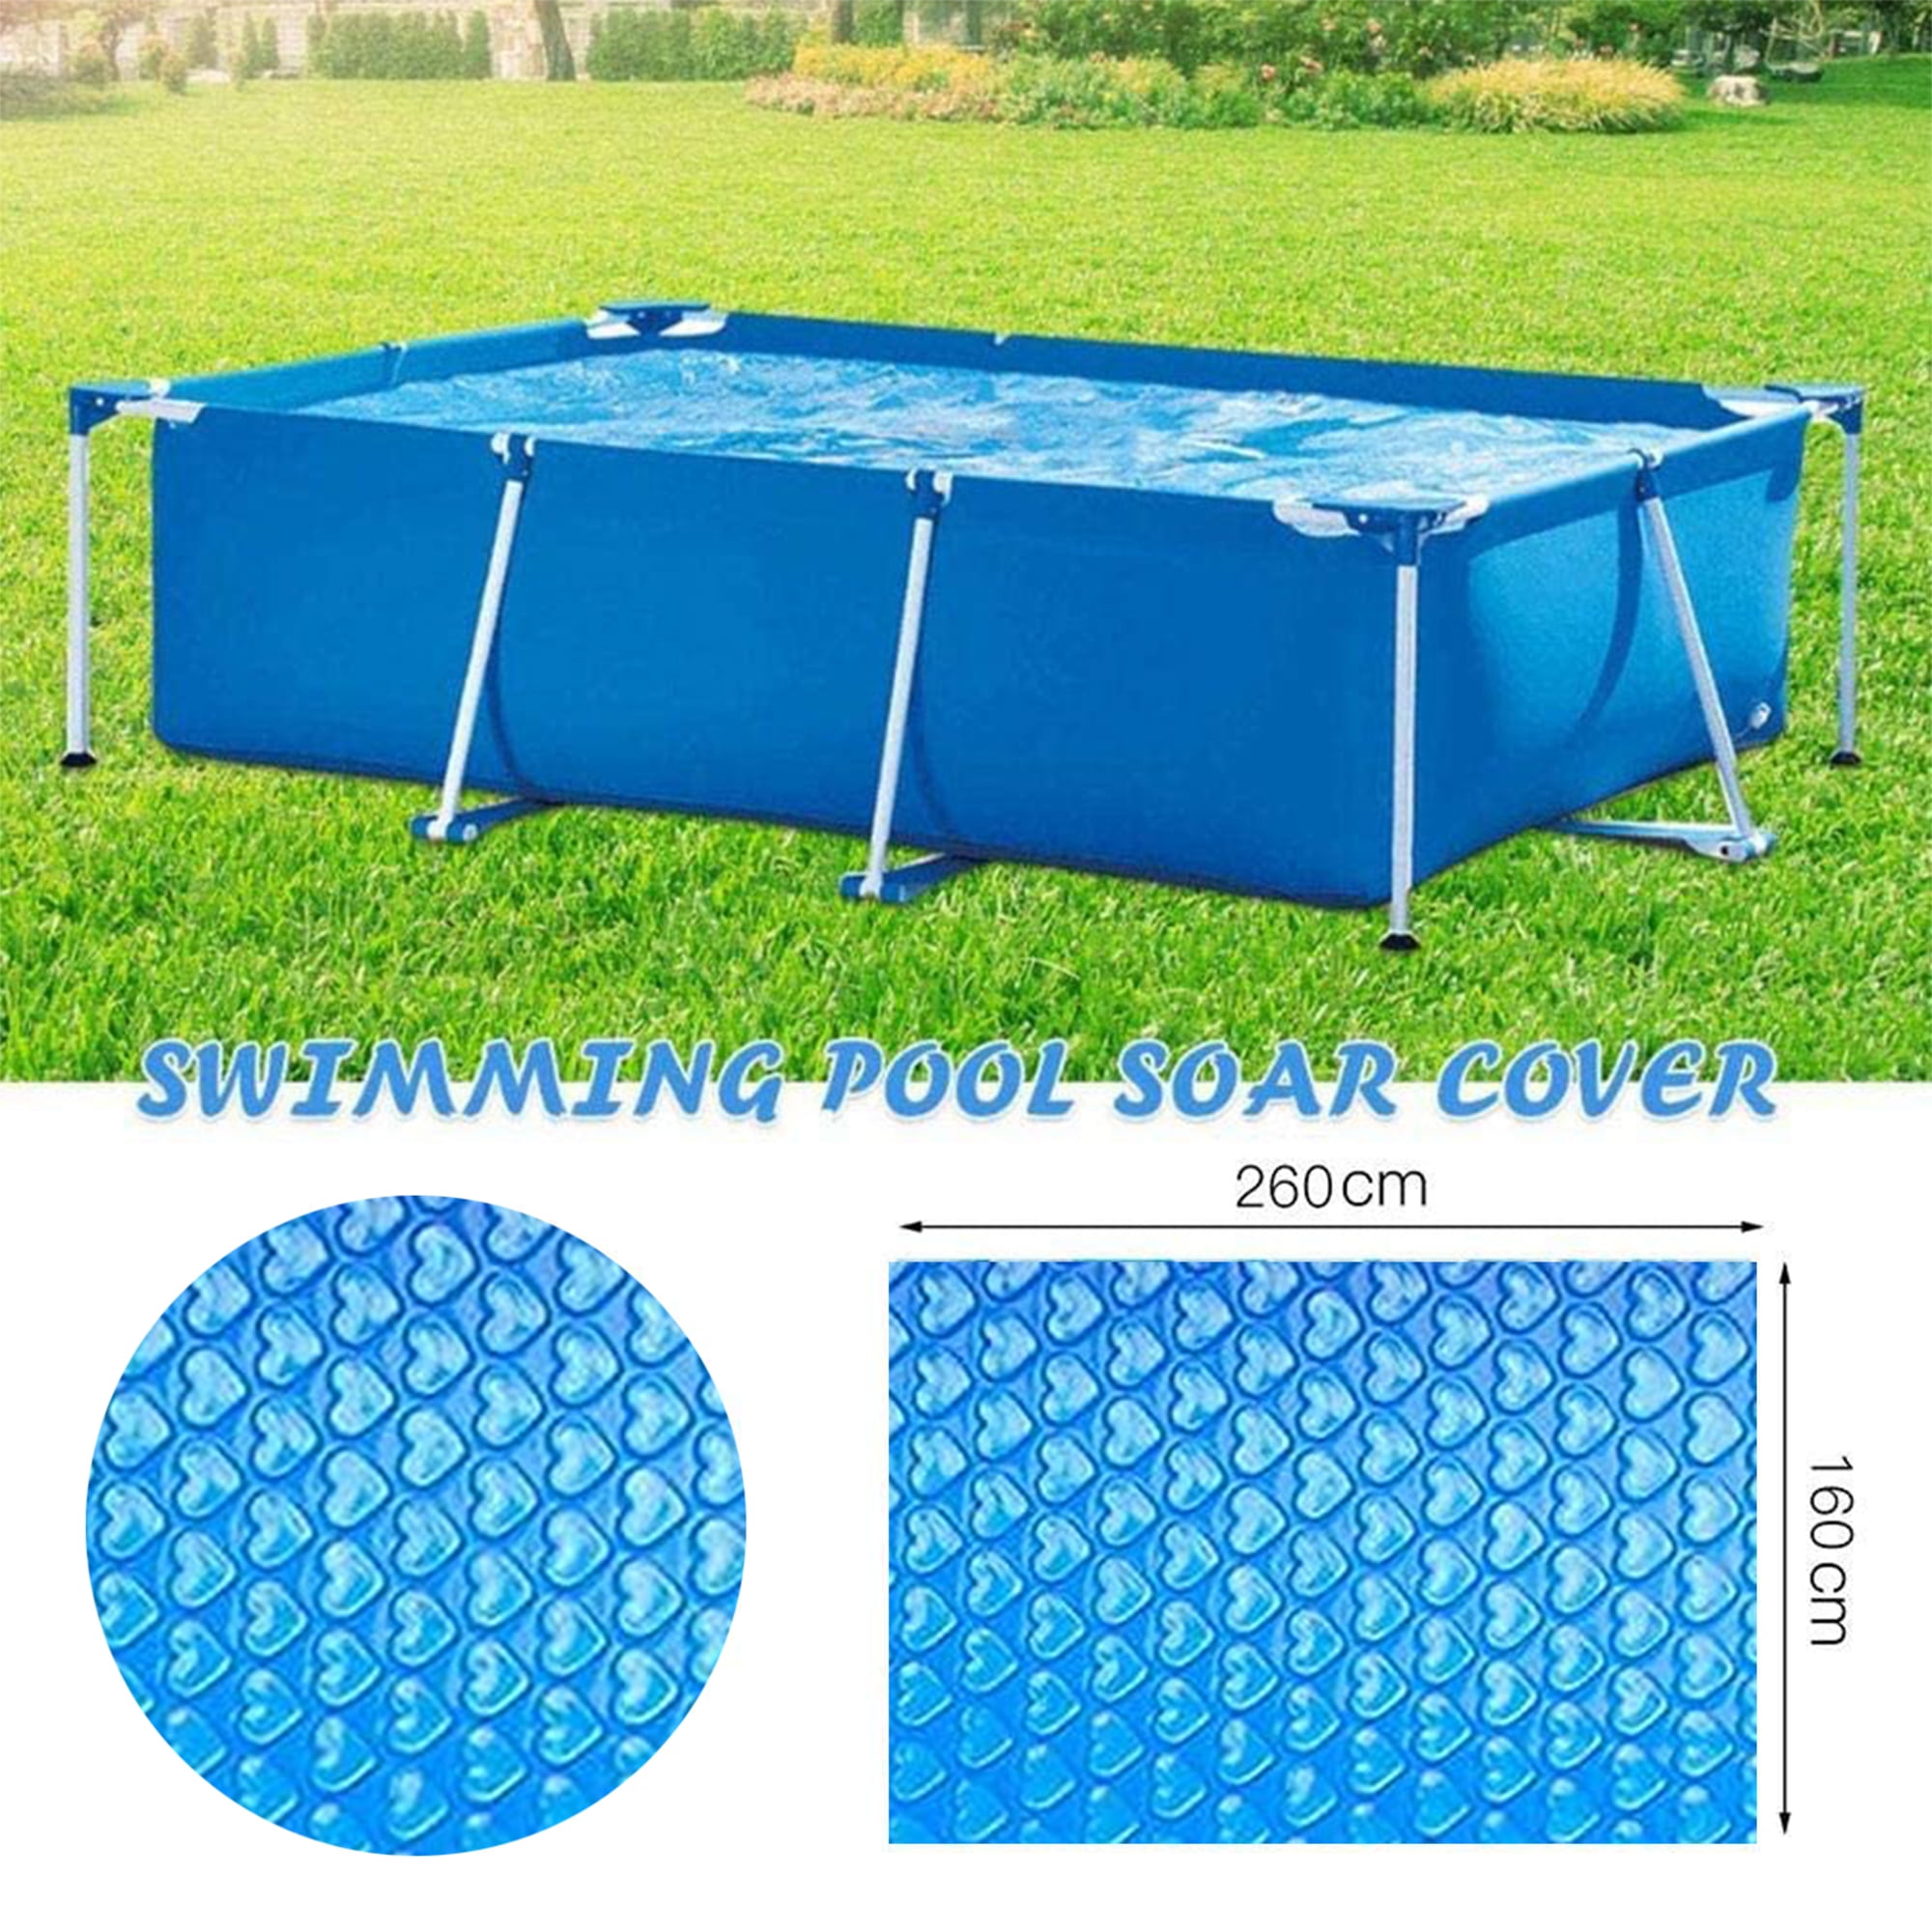 ChYoung Solar Pool Cover Dustproof Fast Set Pool Cover UV Protection Bubble Heat Insulation Film Frame Pool Cover for Inflatable Family Ground Swimming Pool 